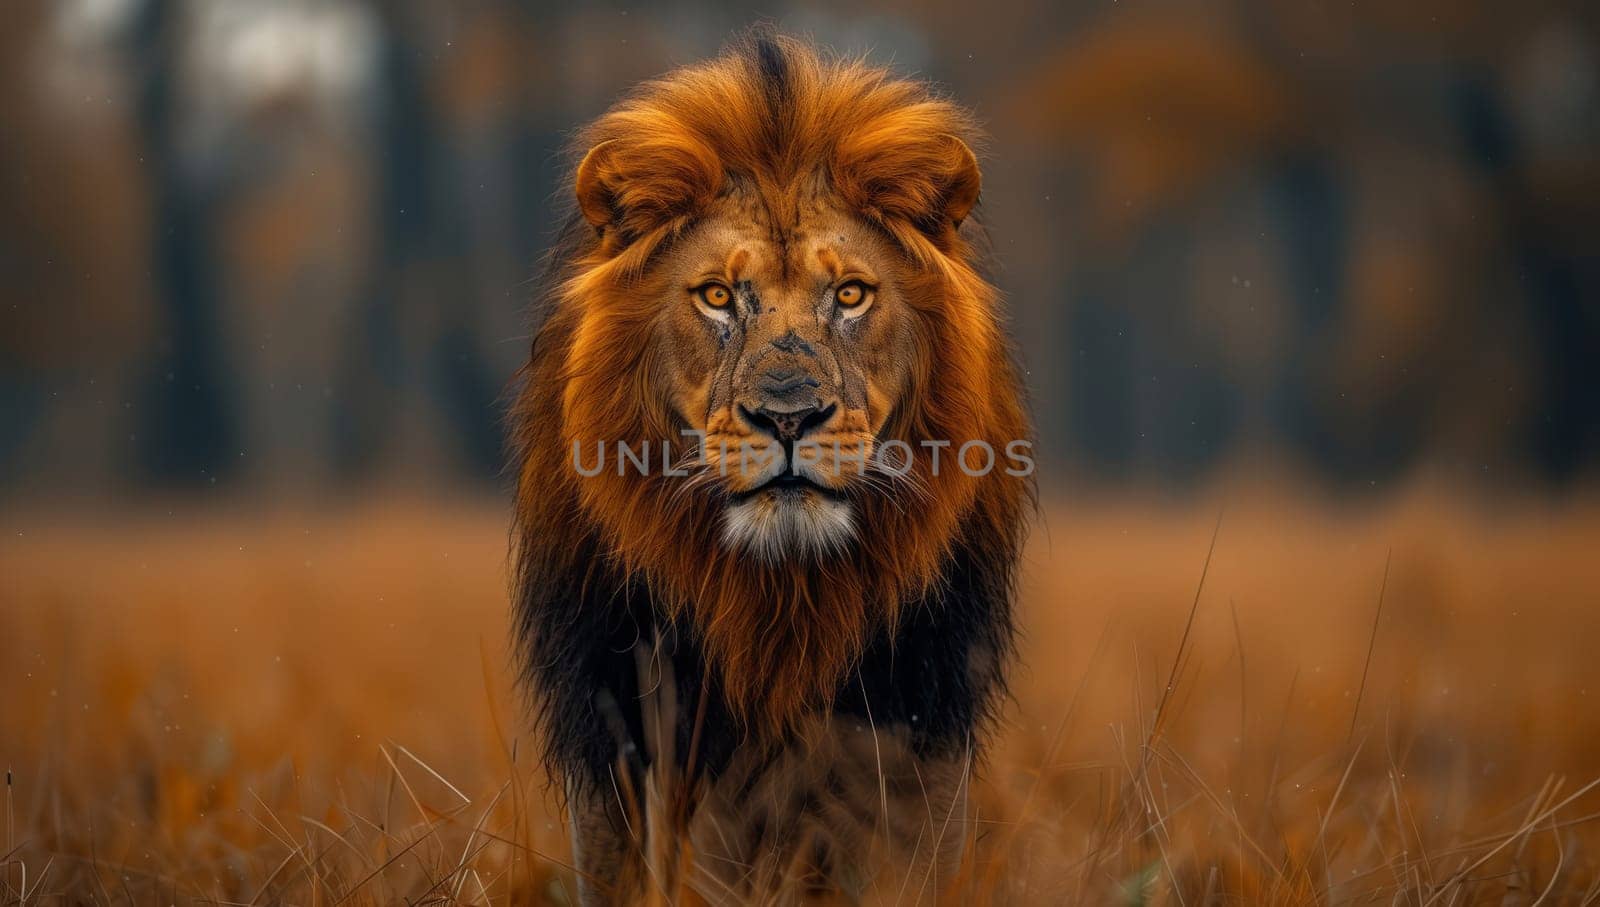 A Masai lion, a carnivorous terrestrial animal of the Felidae family, is standing in a field of dry grass, with its whiskers twitching, gazing at the camera